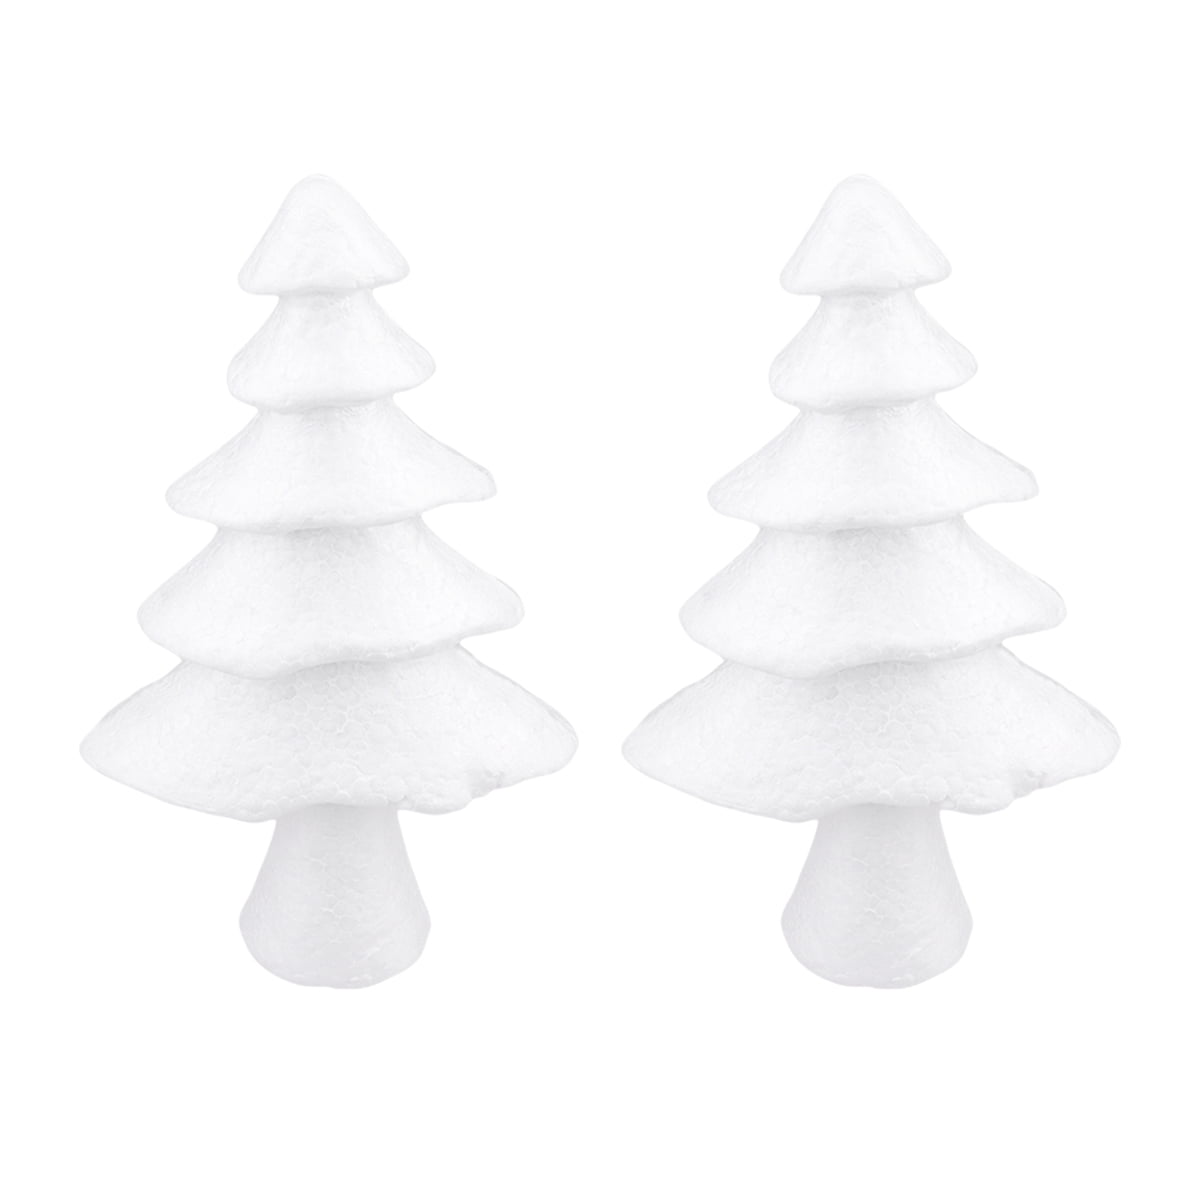 Holibanna Foam Cone Polystyrene Cone Shapes White Christmas Tree Crafts  Table Centerpiece Props 6pcs 9.6 X 3.9 Inch